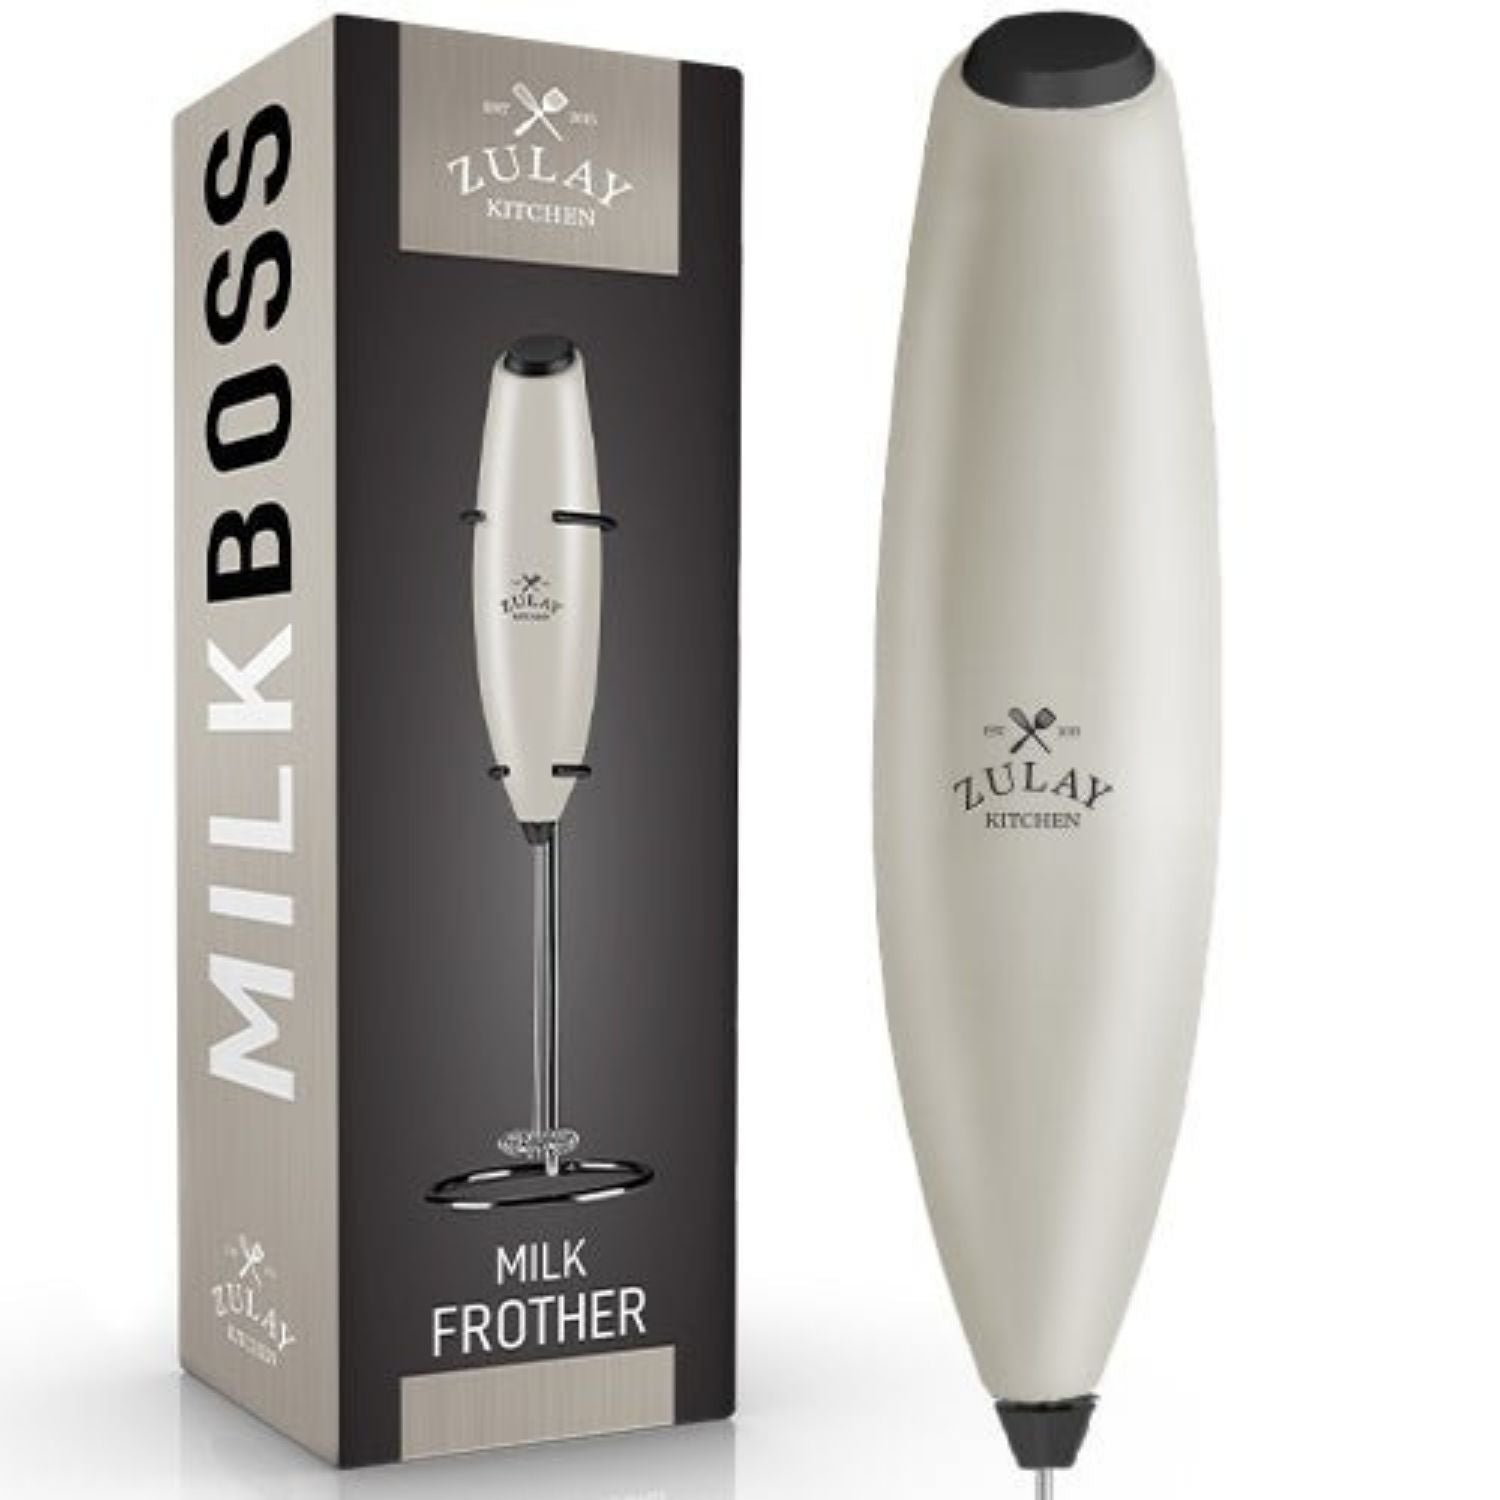 Zulay Kitchen Milk Boss Powerful Milk Frother Handheld With Upgraded  Holster Stand - Macy's